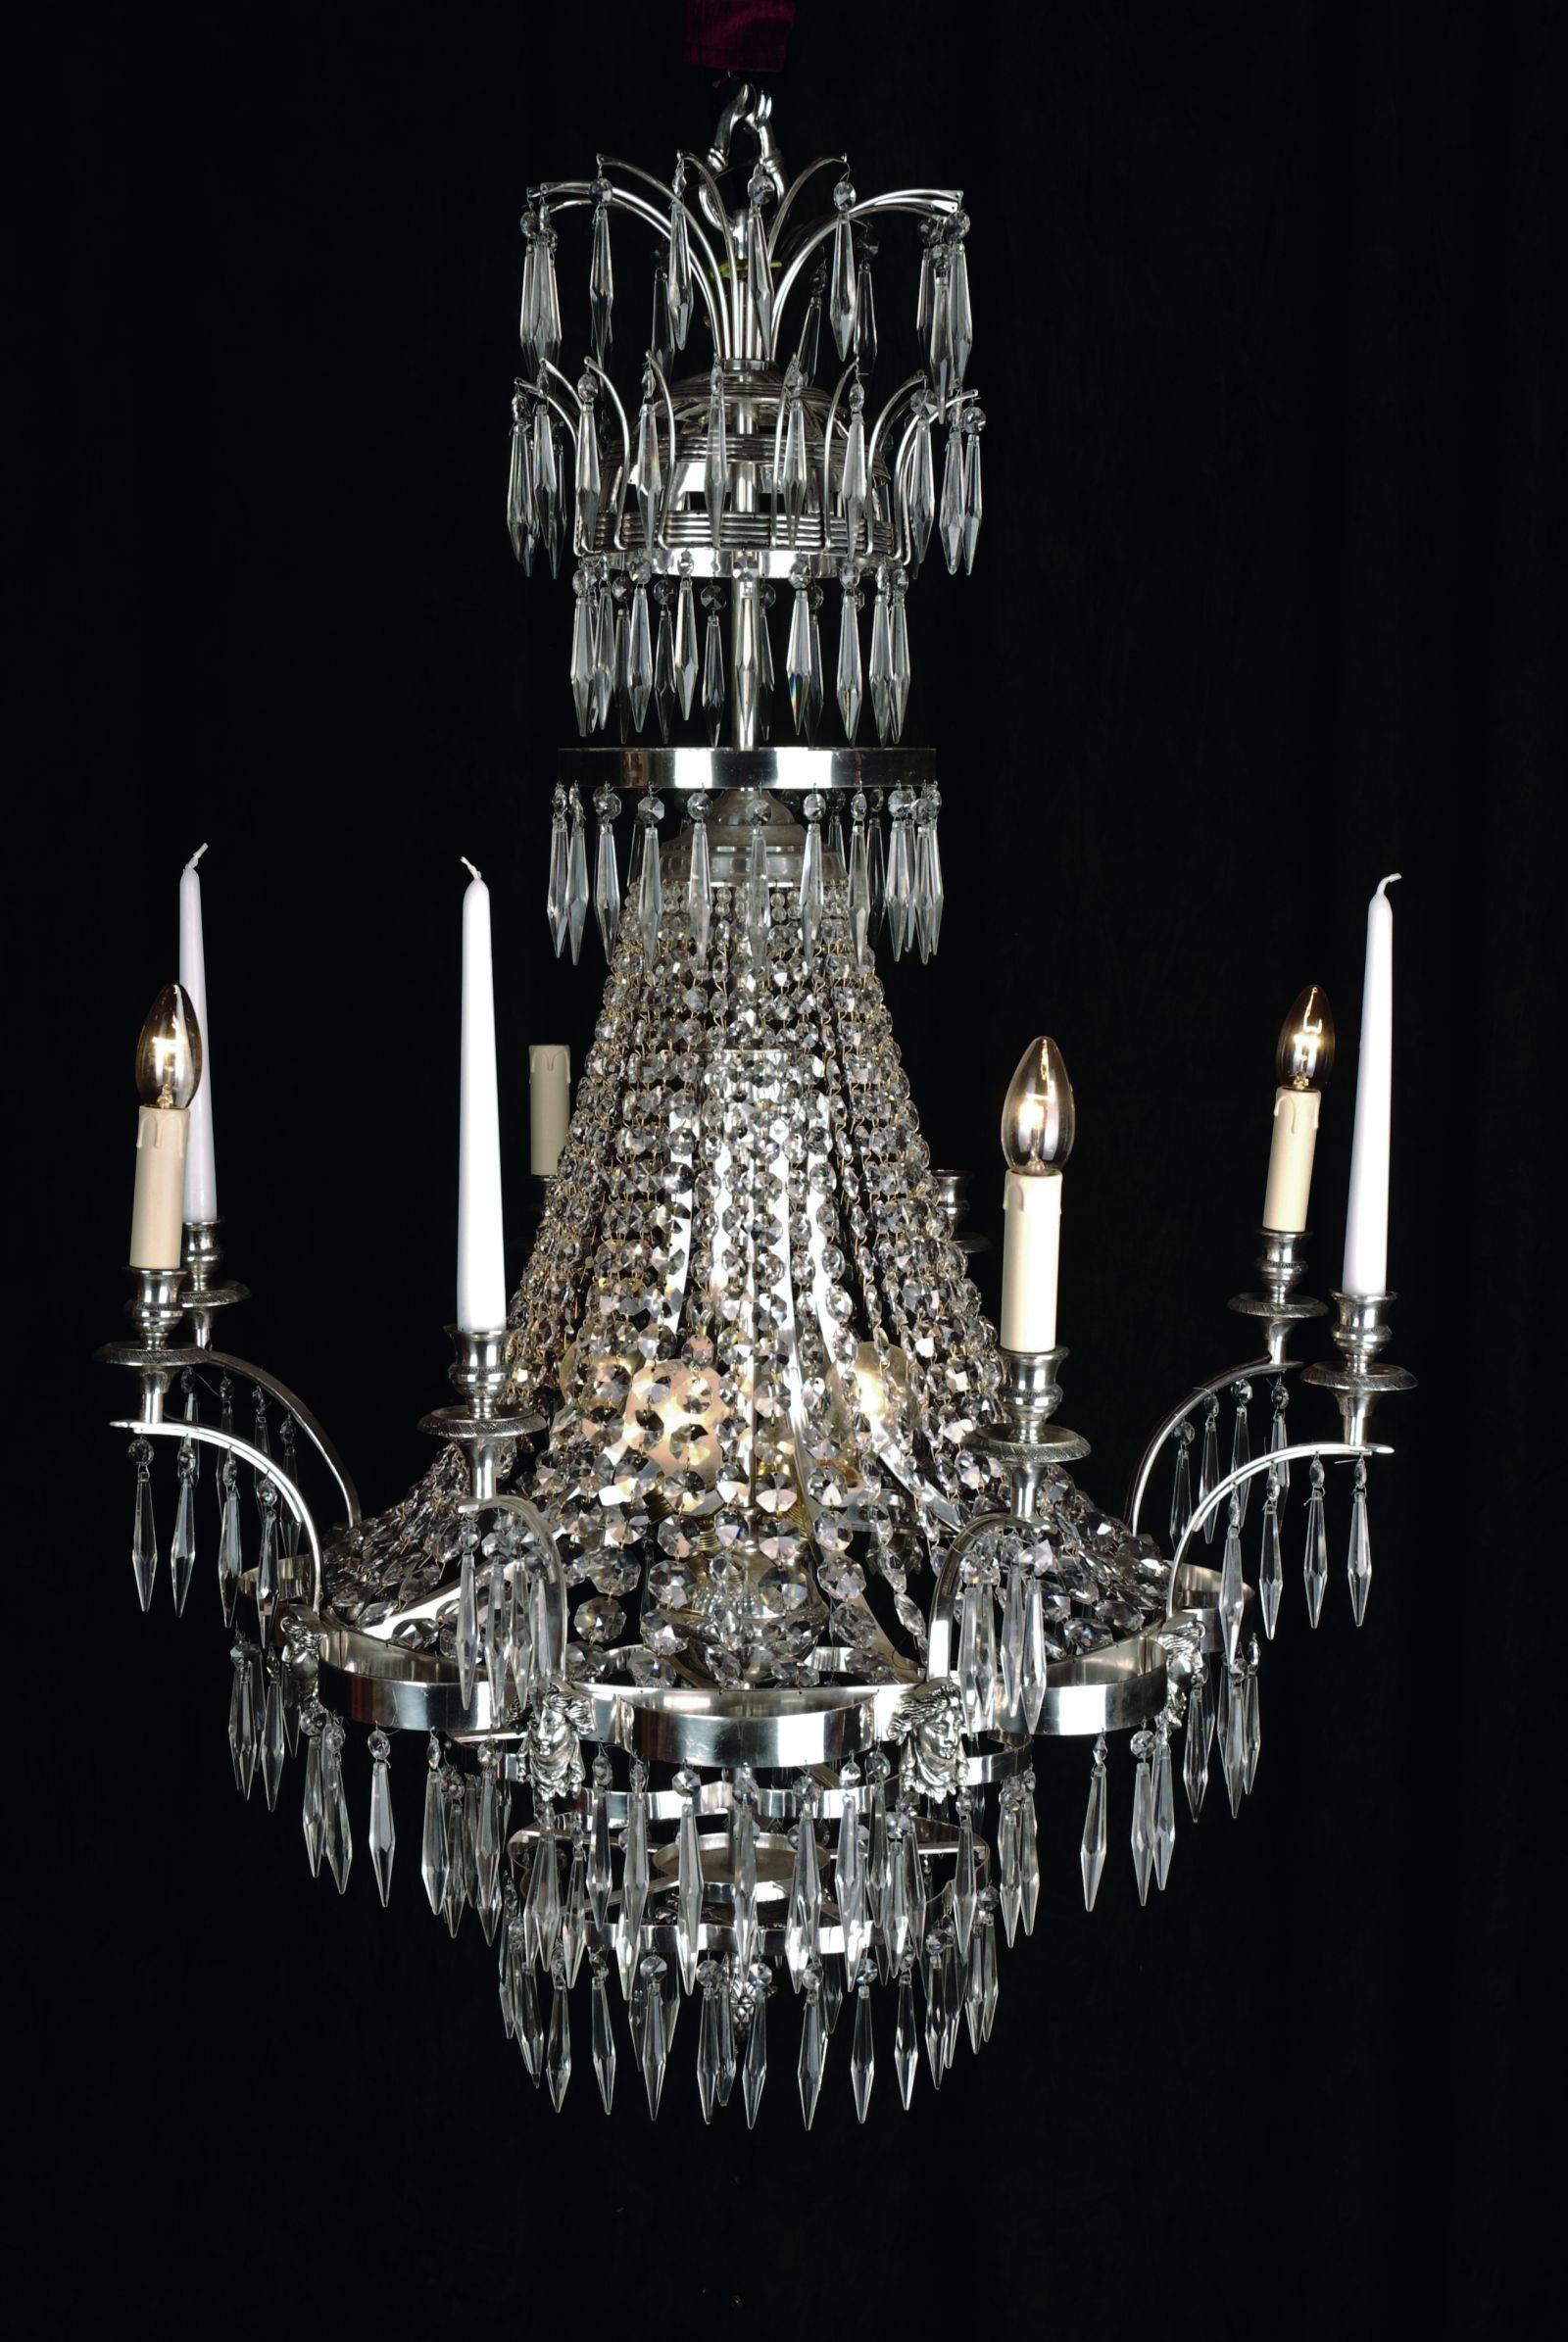 Large Swedish ceiling chandelier in classicist style.
Polished, silvered brass. Facetted glass hangings. 

(F-Ra-60).